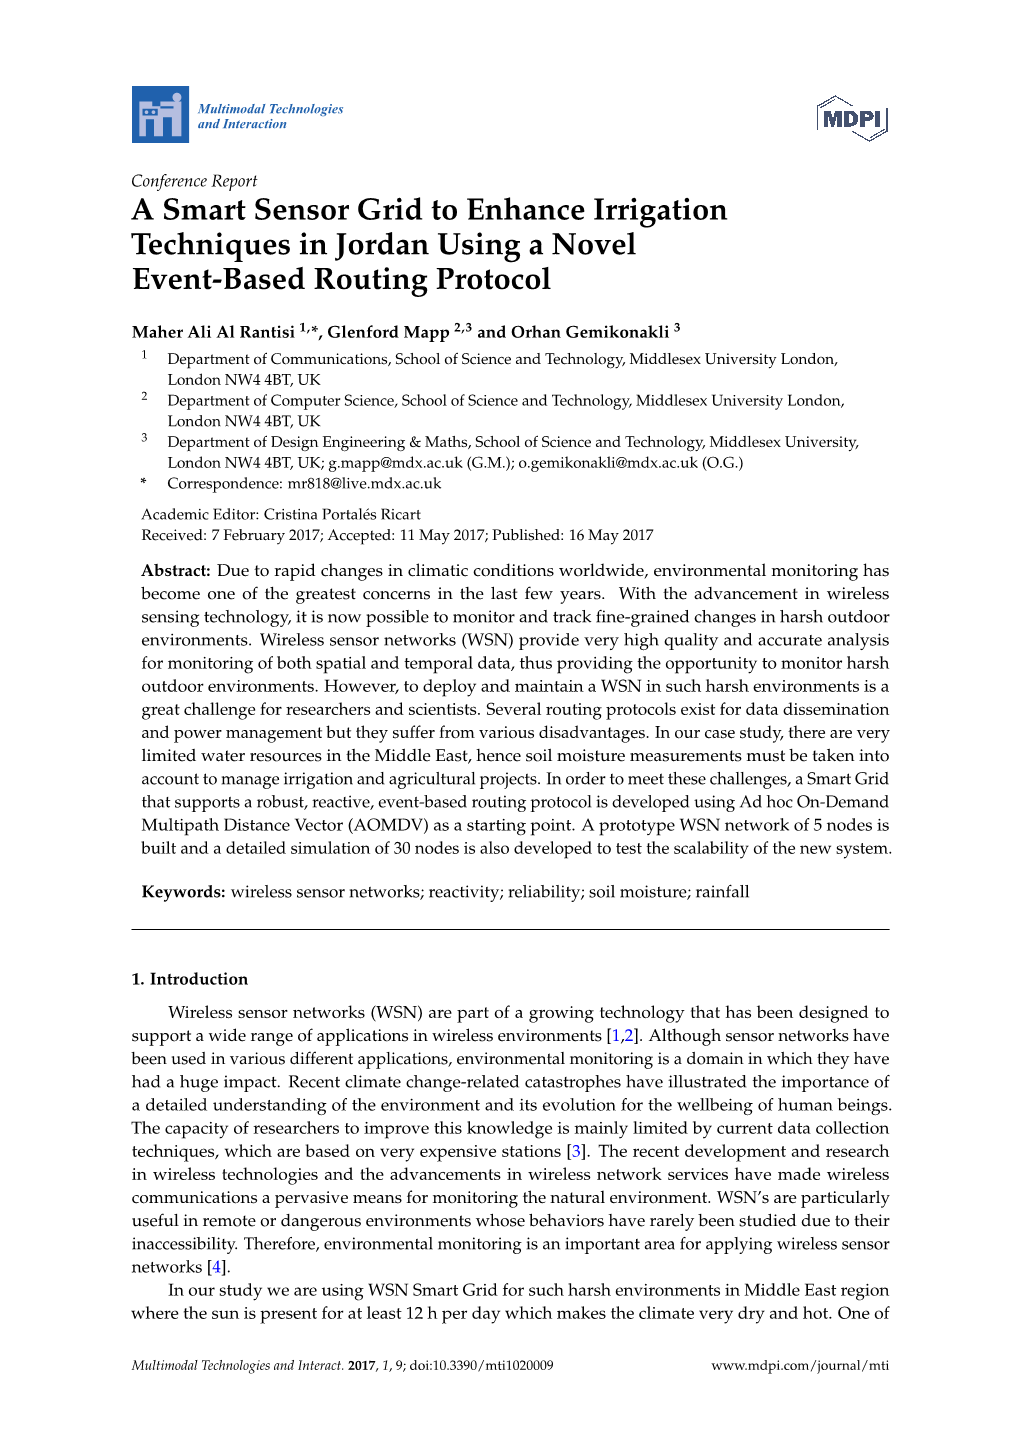 A Smart Sensor Grid to Enhance Irrigation Techniques in Jordan Using a Novel Event-Based Routing Protocol